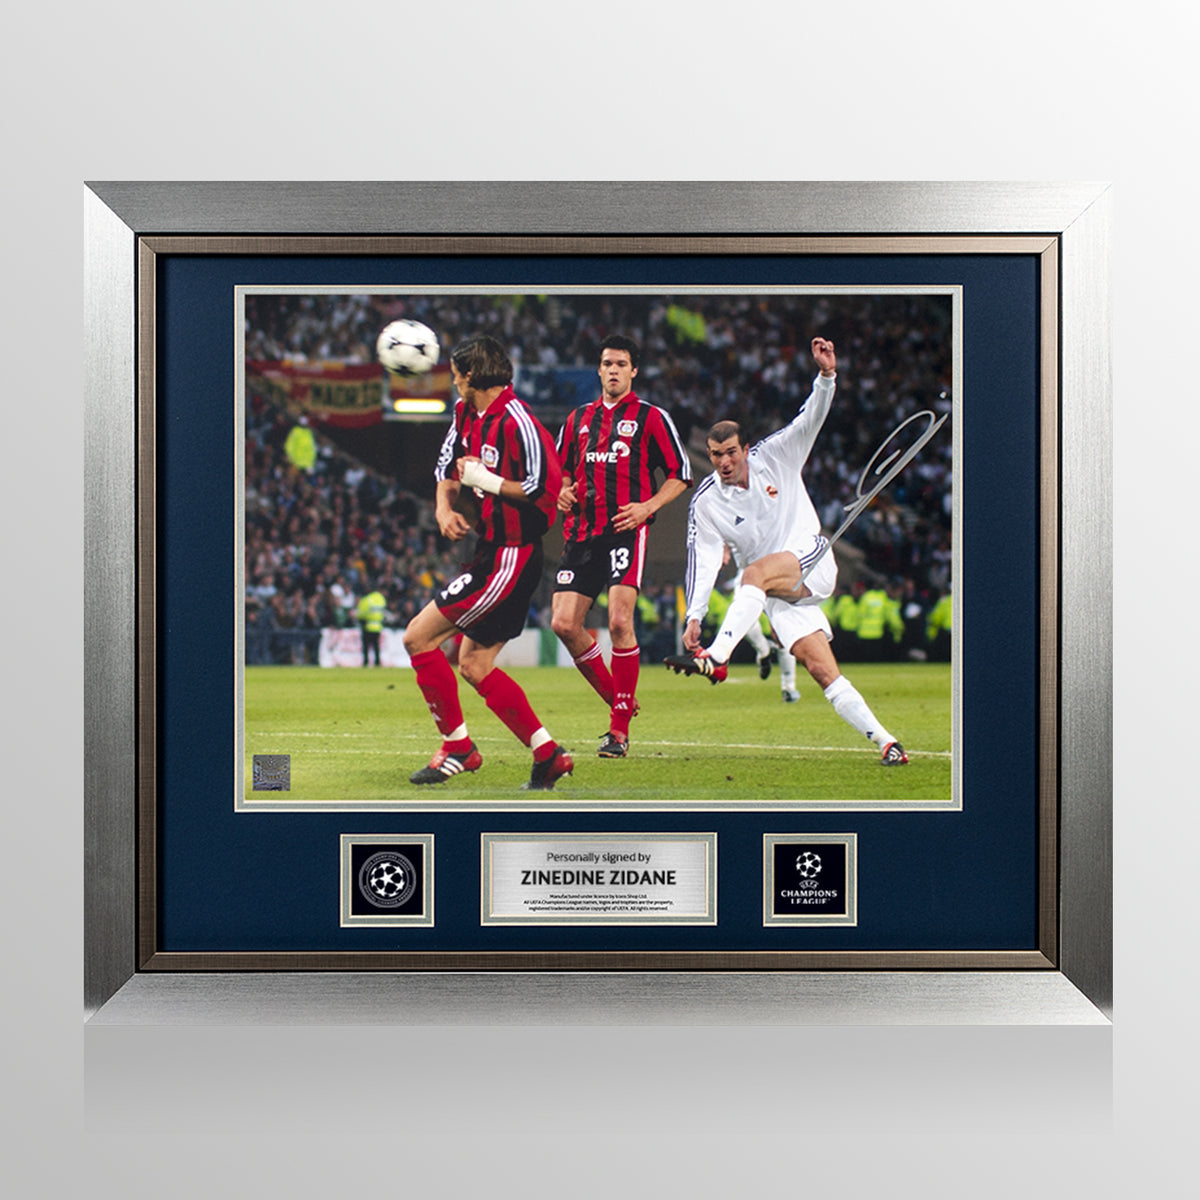 Zinedine Zidane Official UEFA Champions League Signed and Framed Real Madrid Photo: 2002 UEFA Champions League Final Volley UEFA Club Competitions Online Store